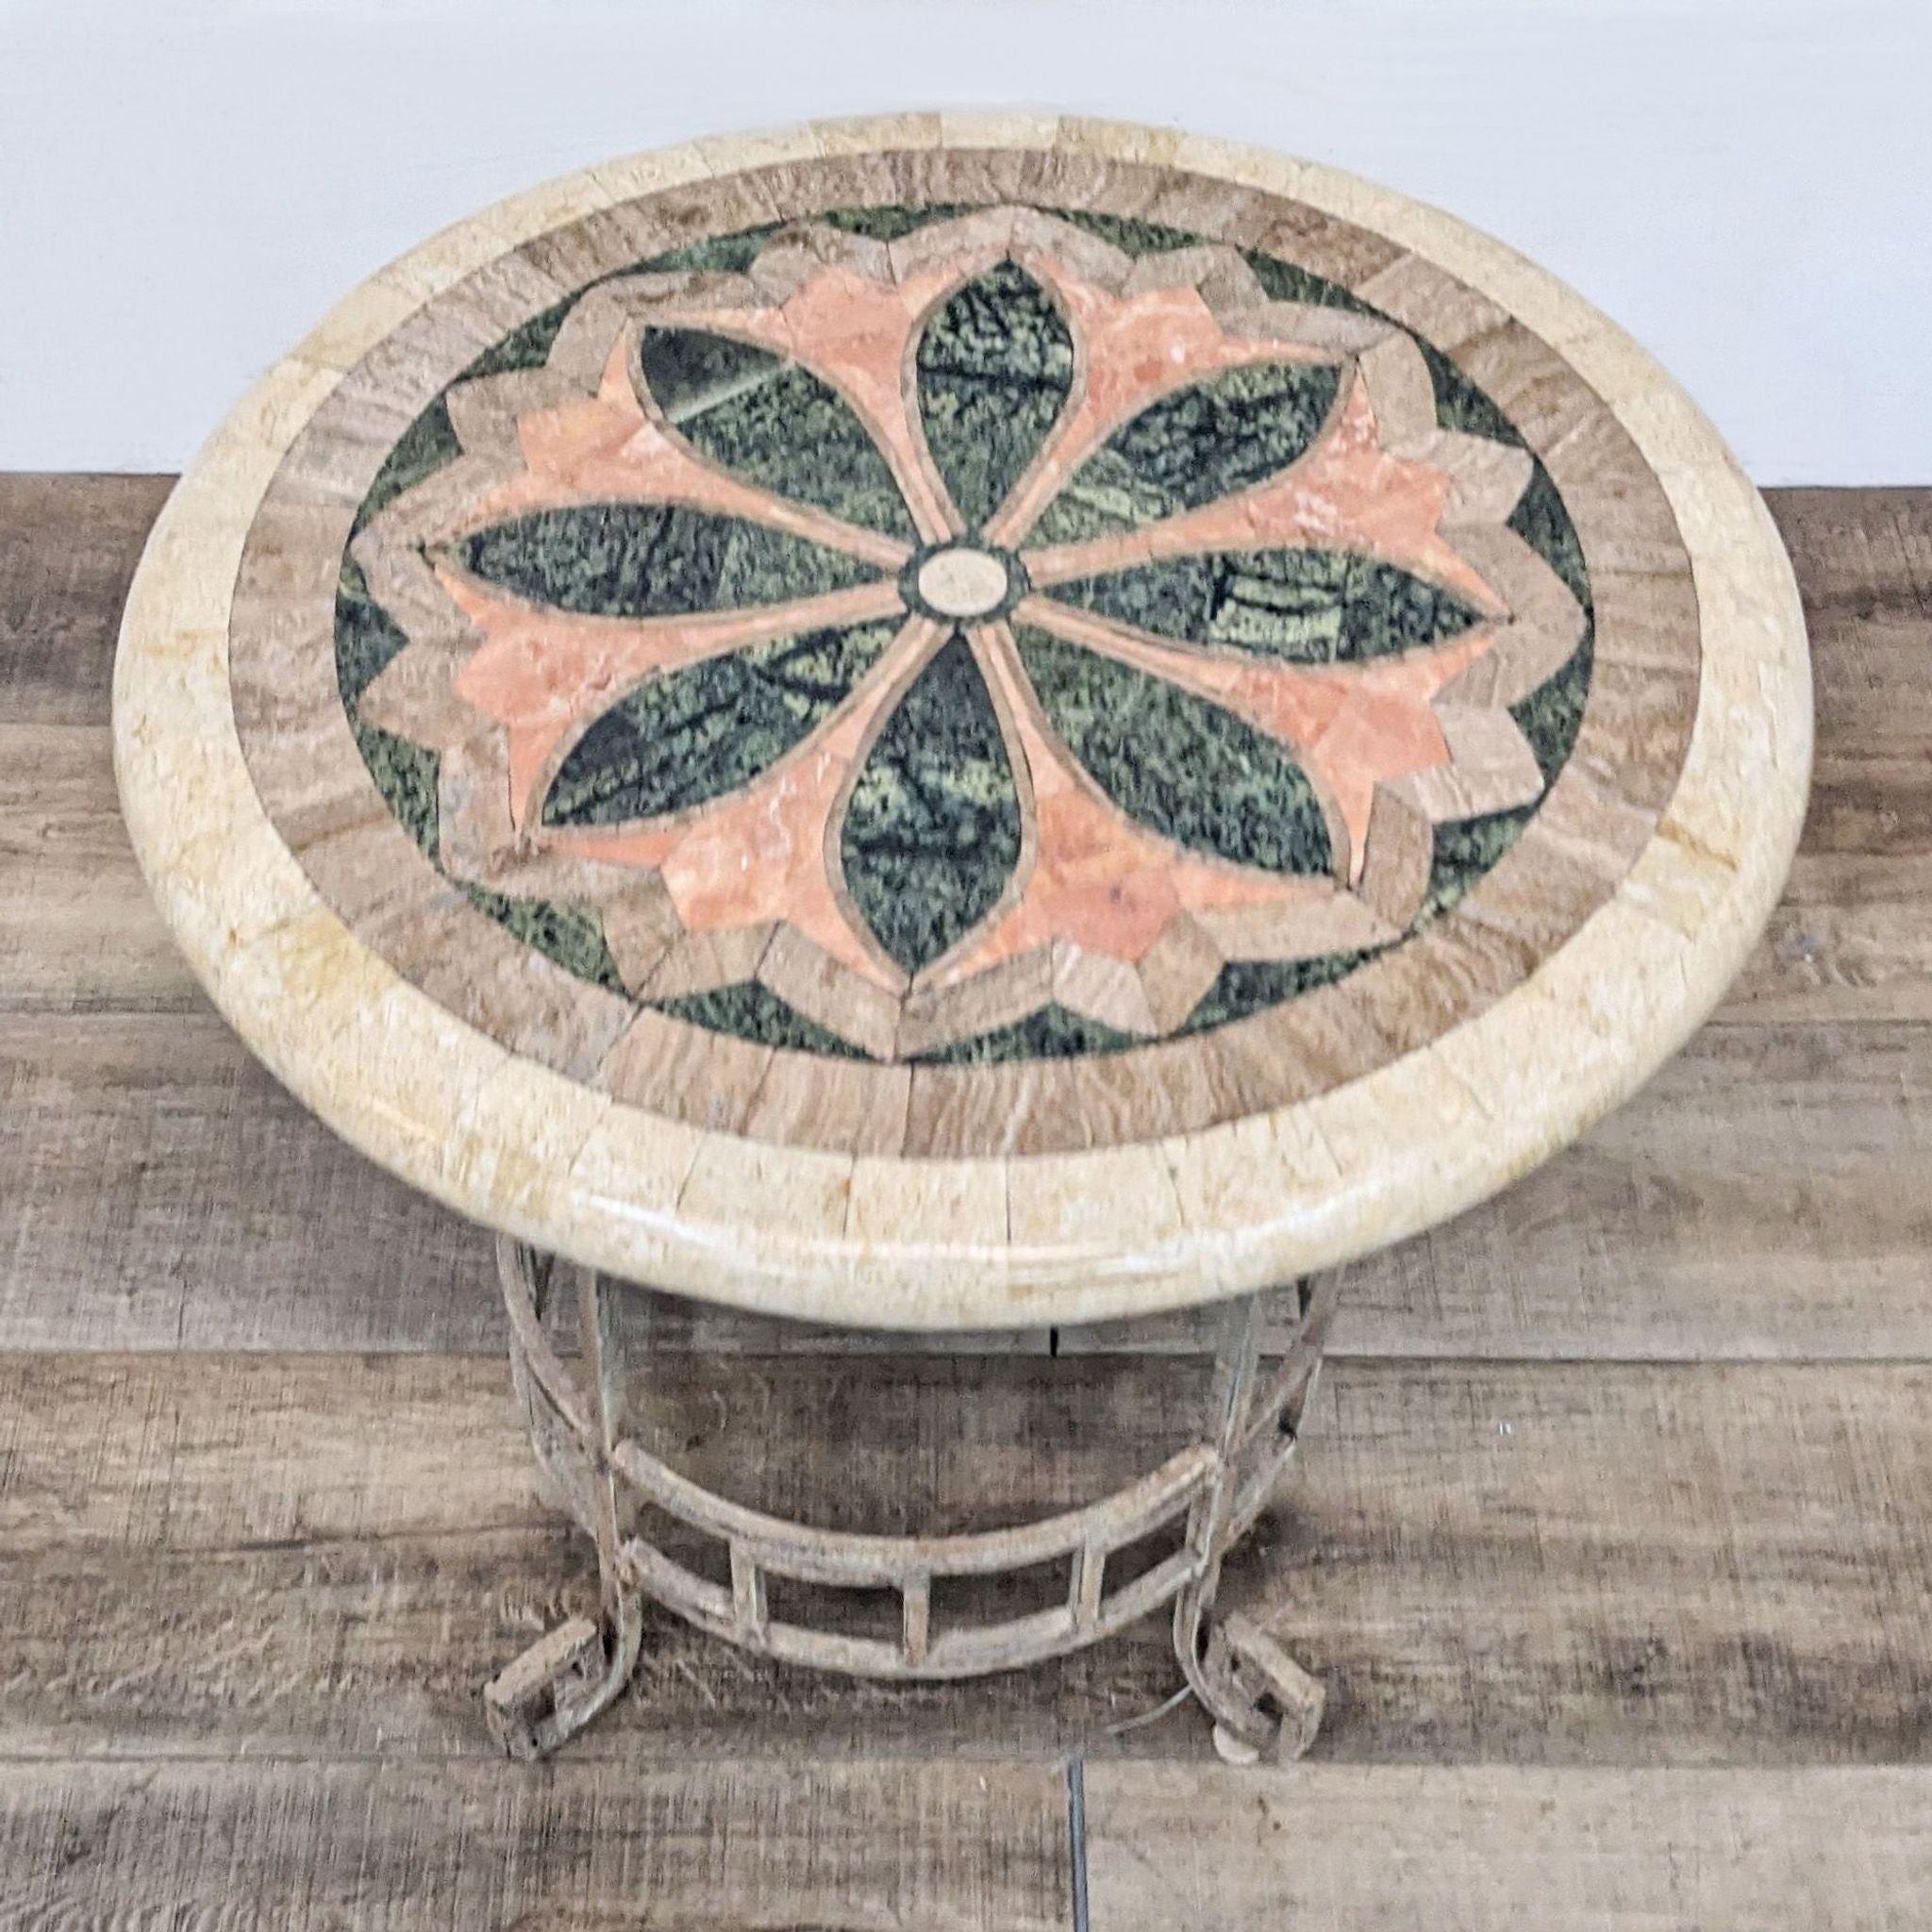 Reperch brand end table with a round, faux stone patterned top featuring a floral design, on a decorative base.